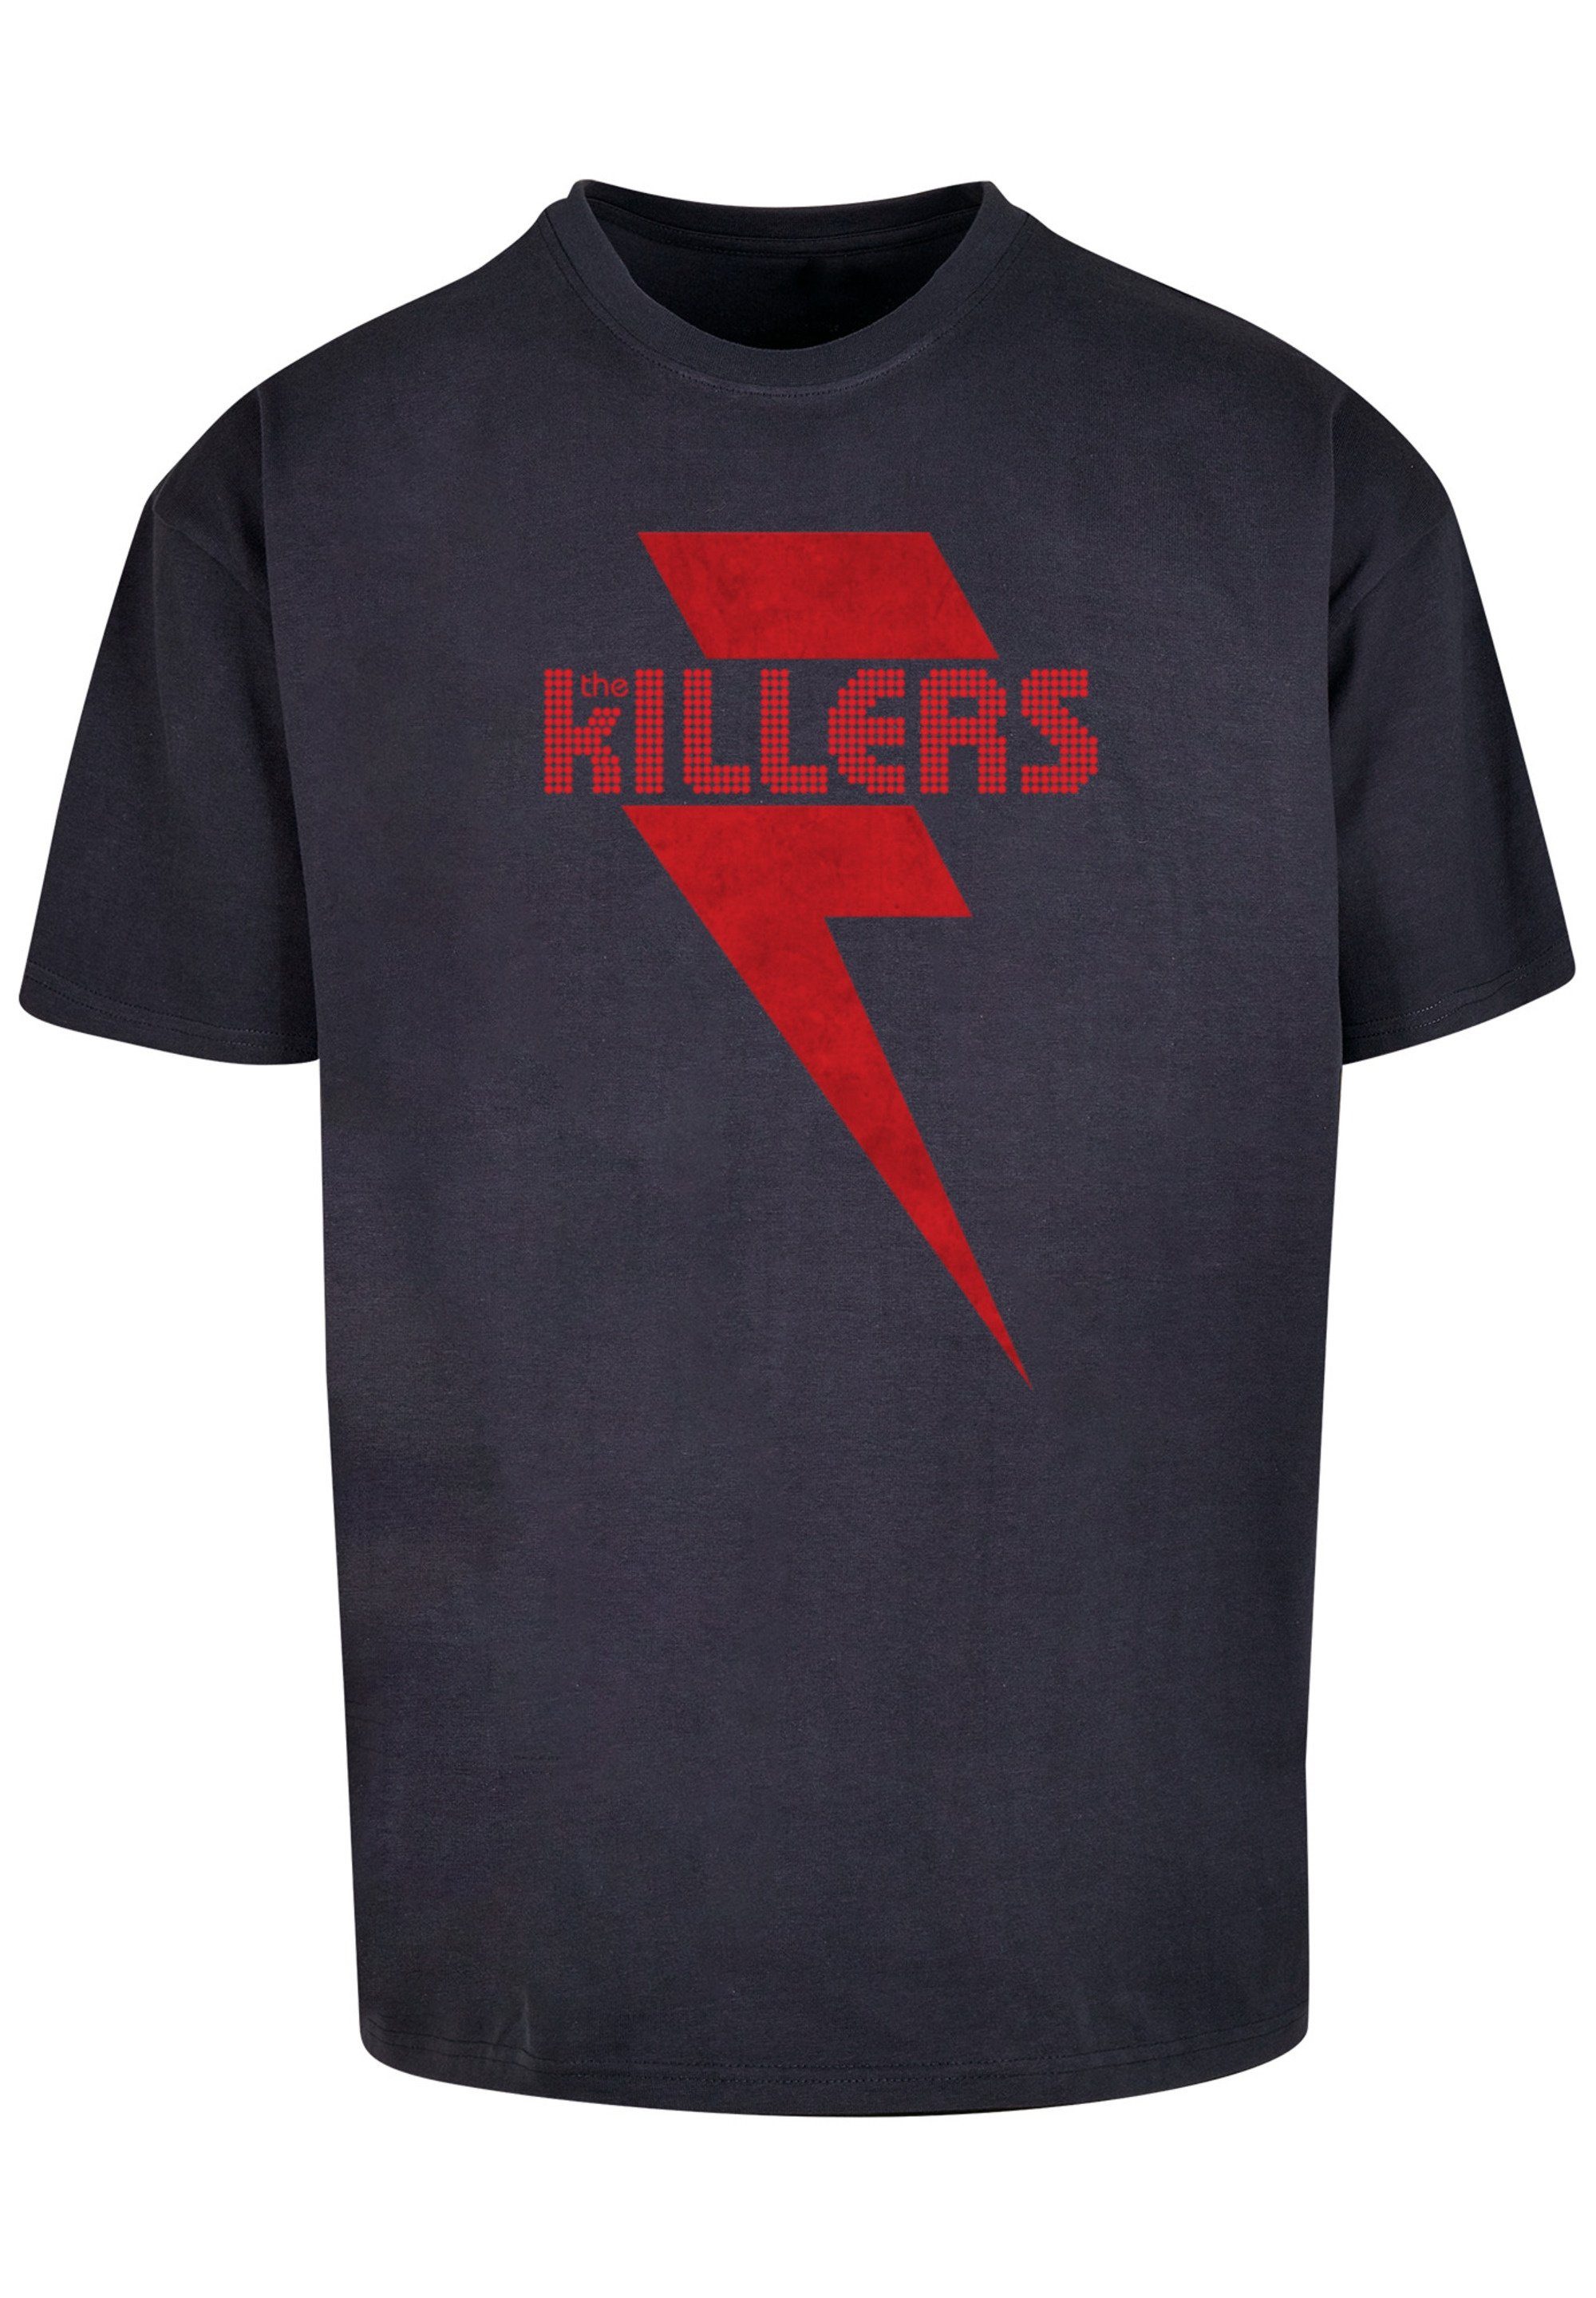 Rock Band Print T-Shirt Red Killers navy The F4NT4STIC Bolt